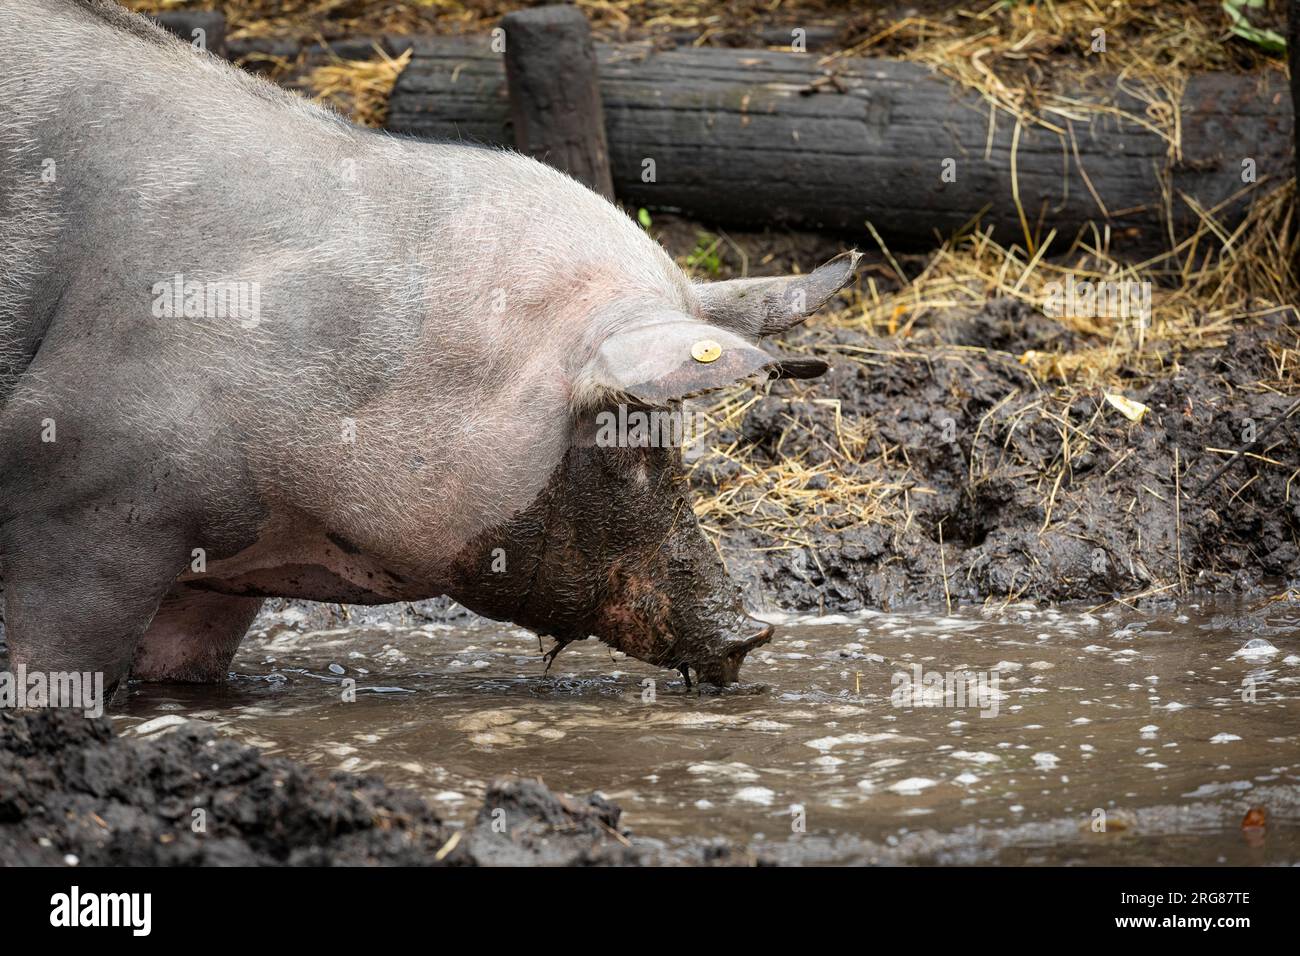 Free range pig cooling down in a pool of mud Stock Photo